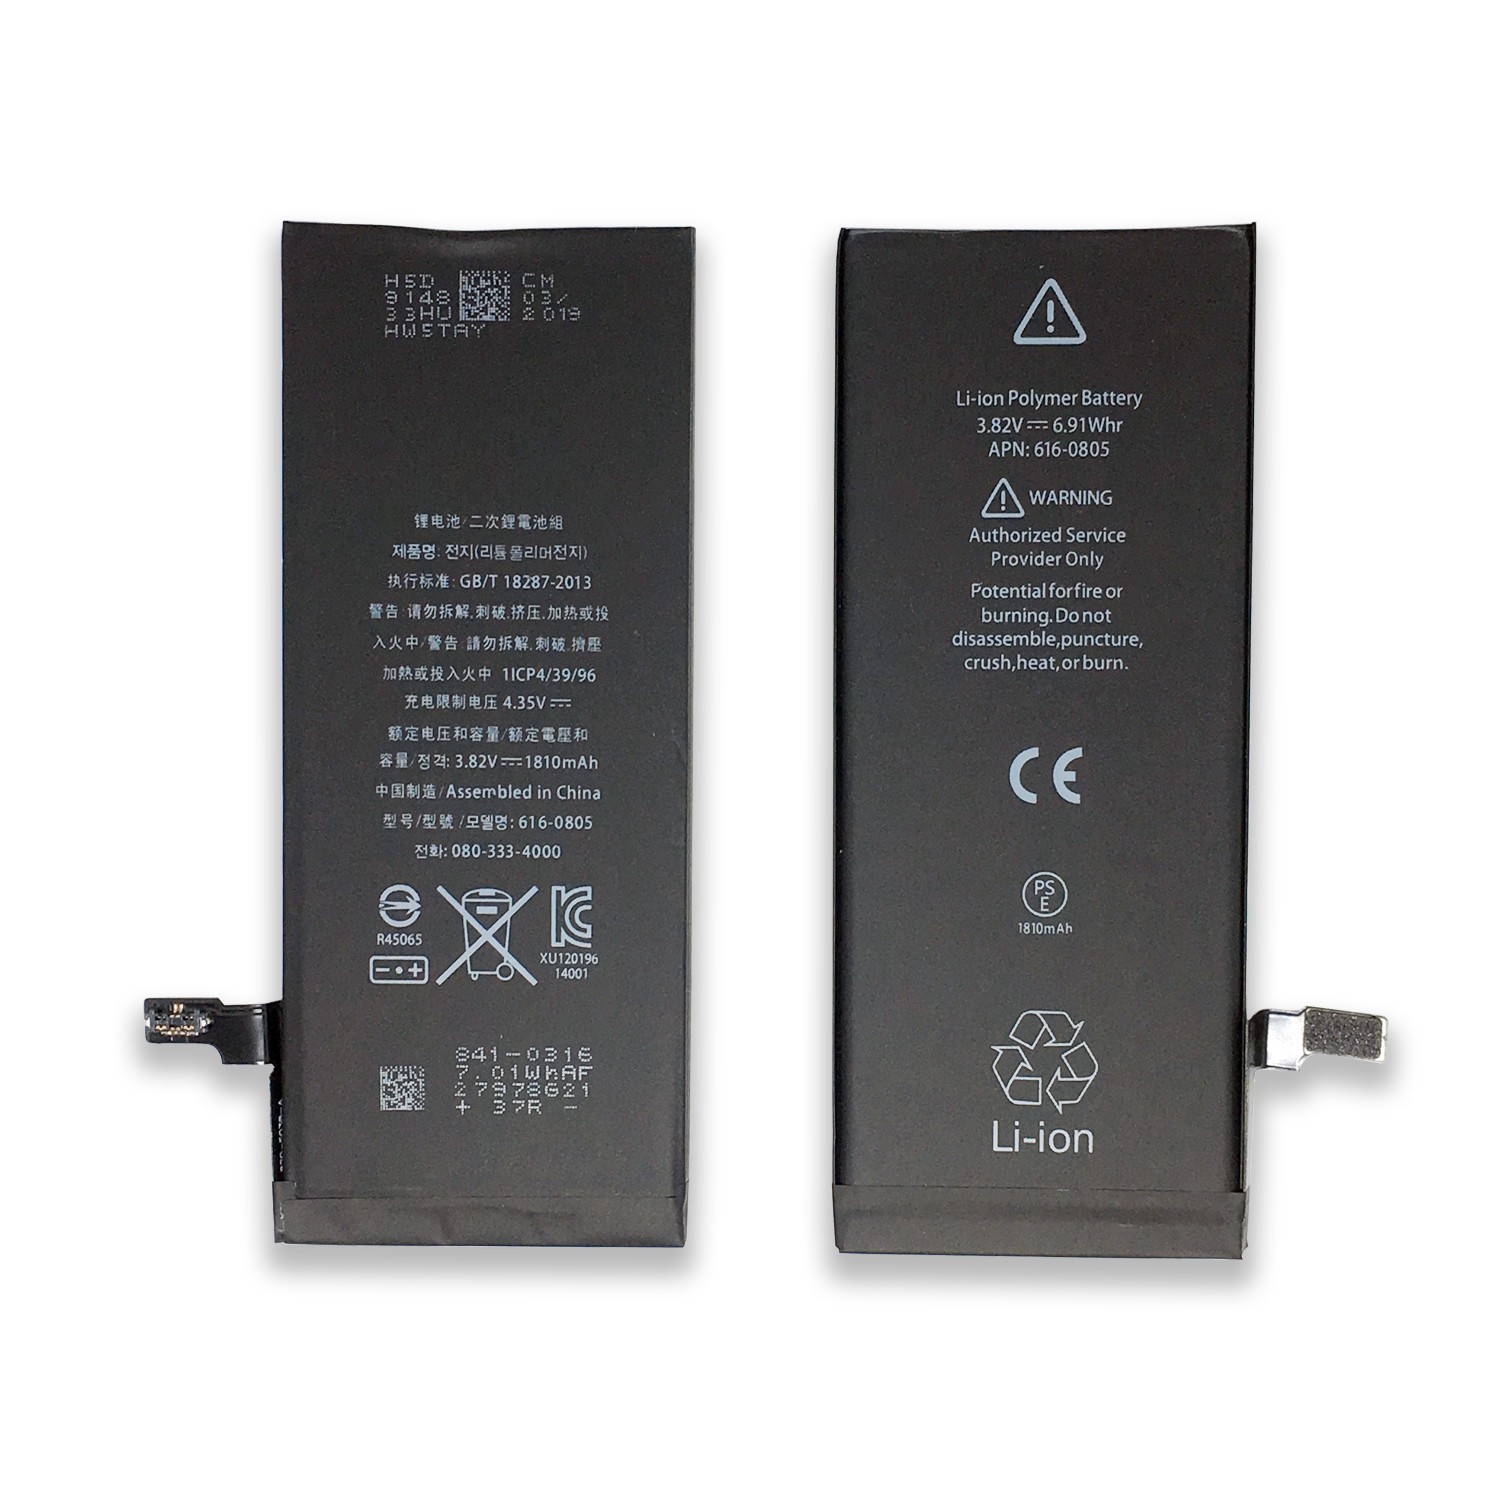 Distributor Wholesale iPhone 6 Replacement Phone Battery with high quality